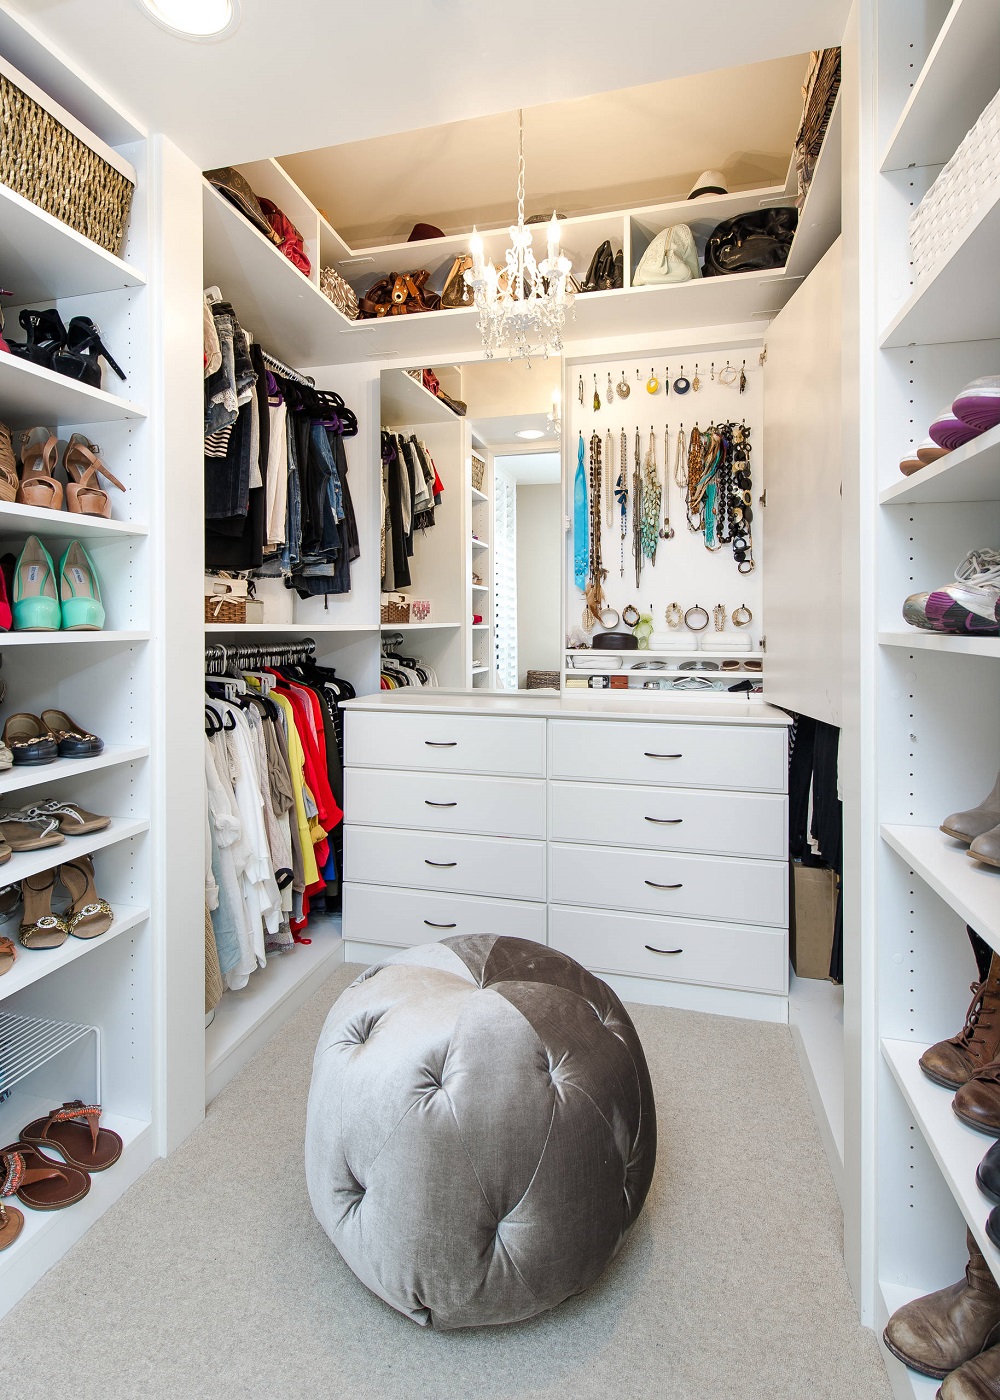 wc16 Cool walk-in closet ideas you should have in your home